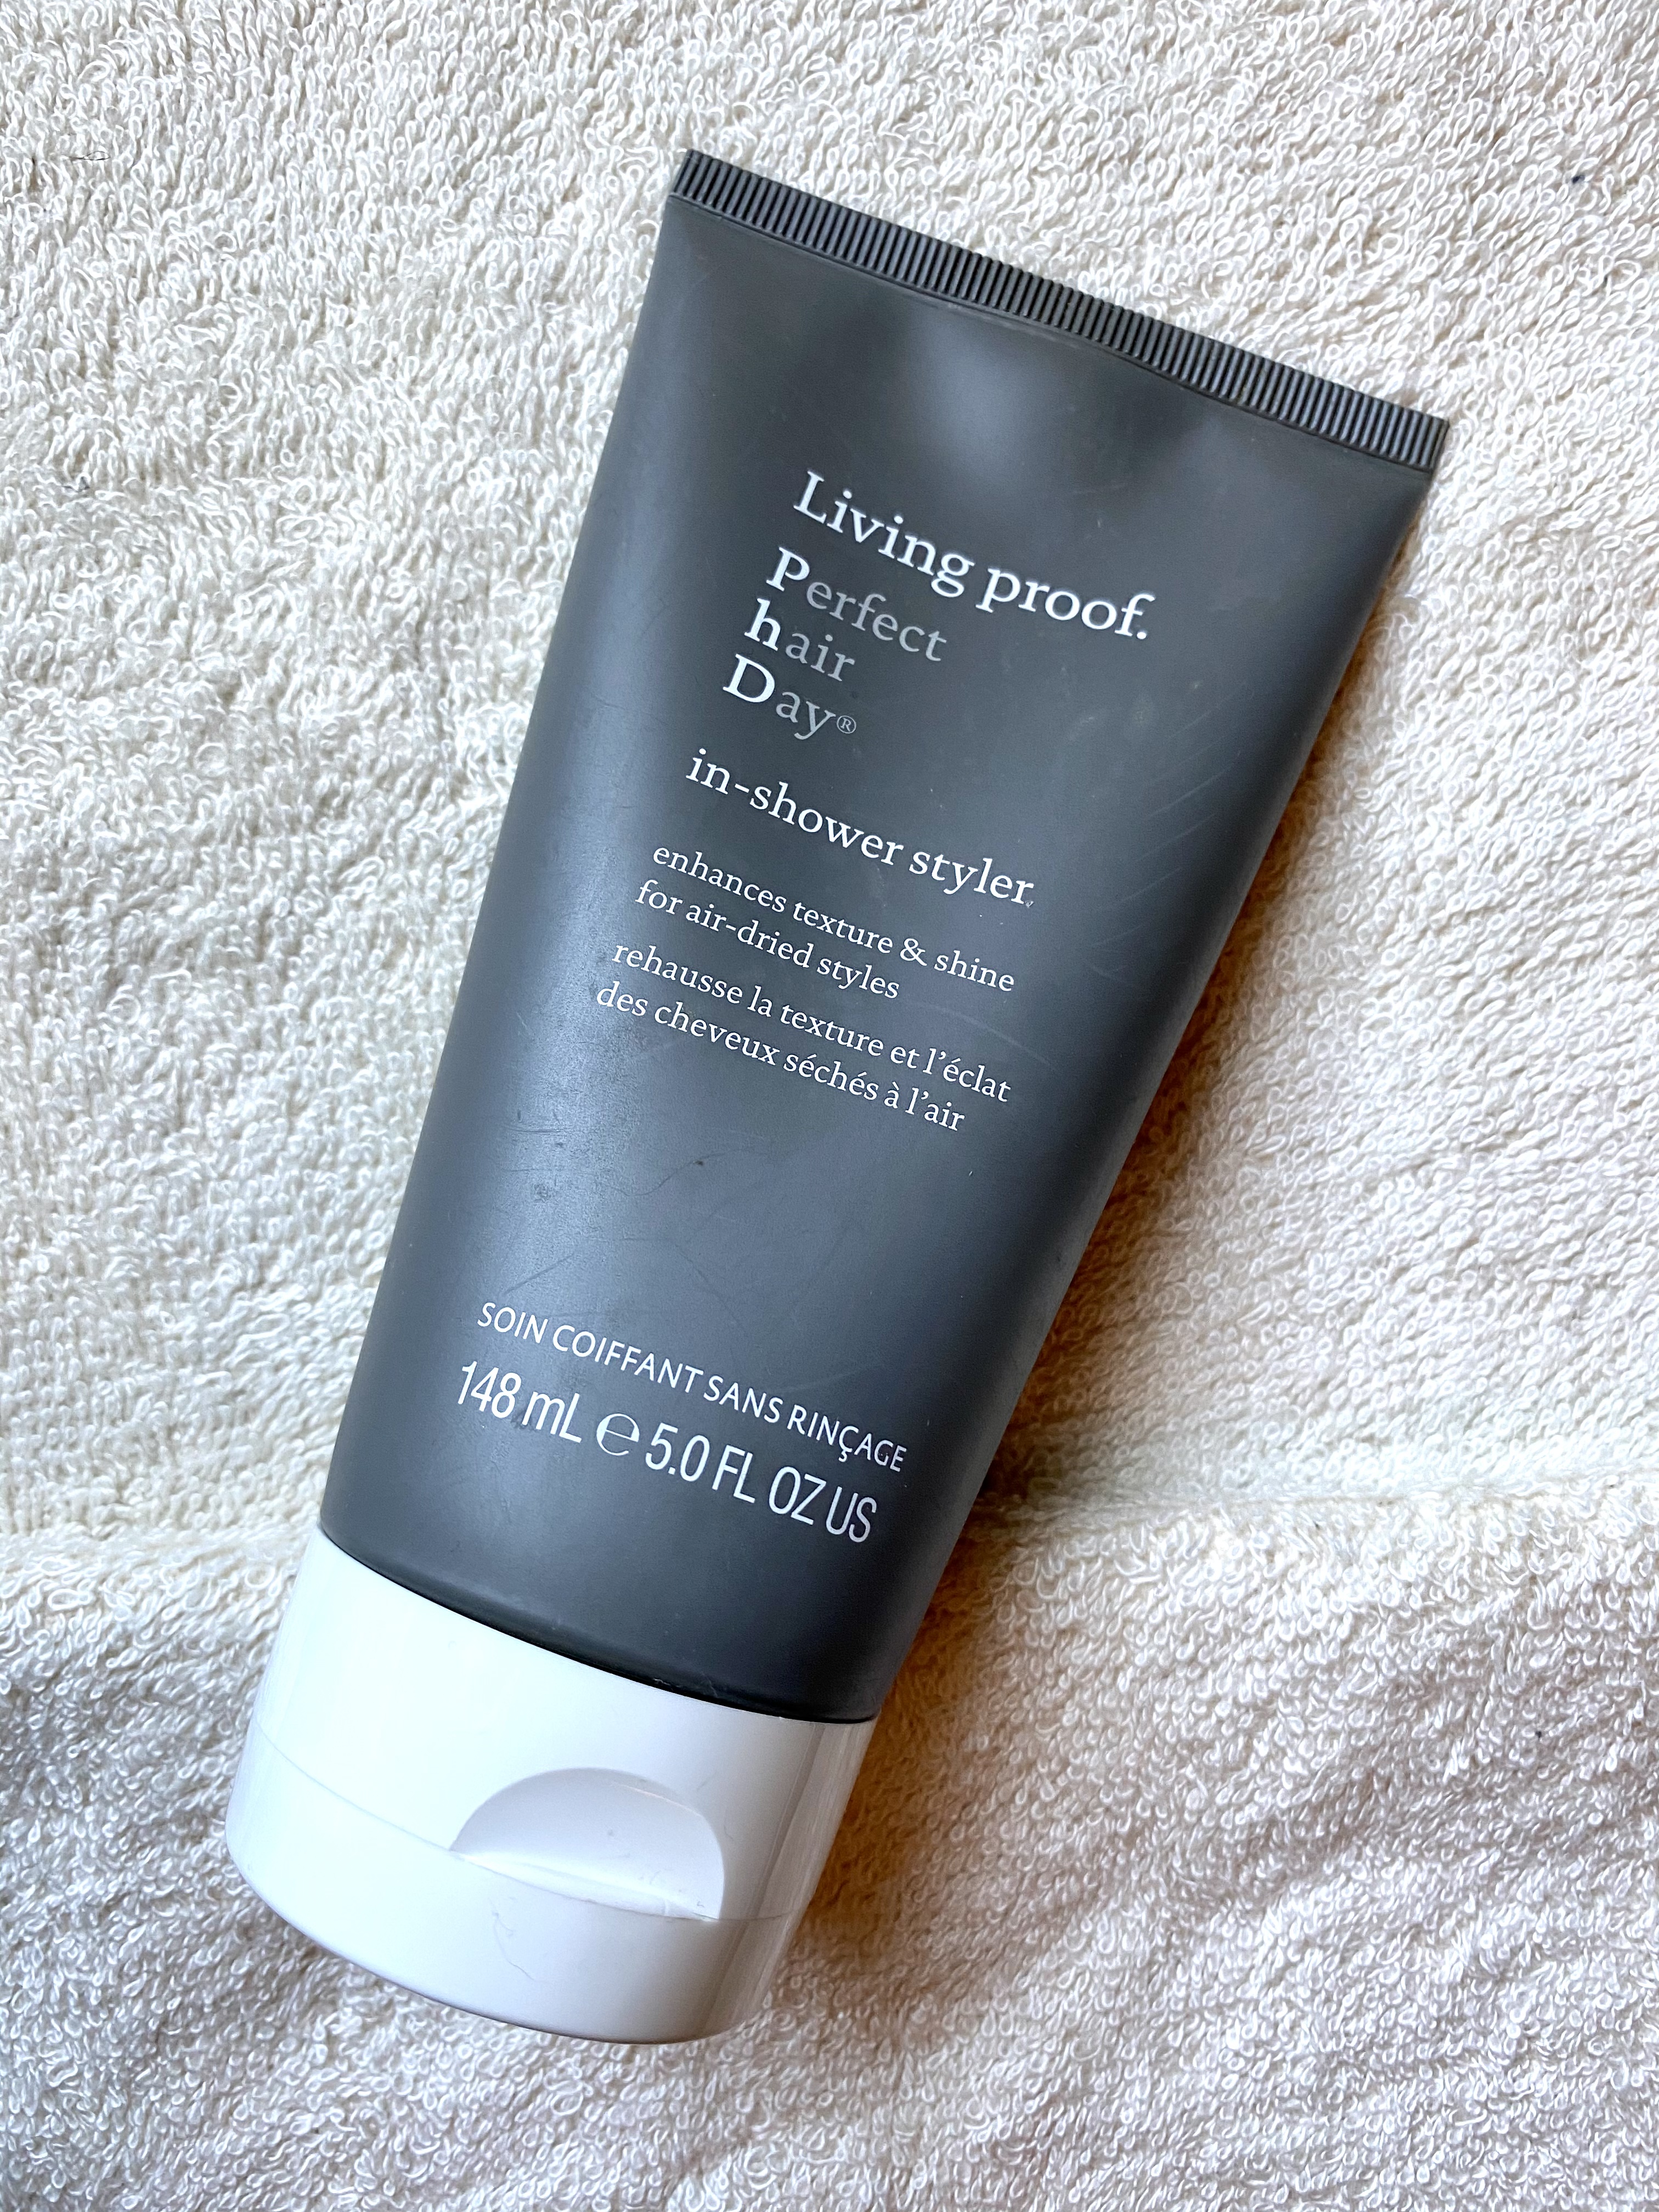 Living Proof Perfect Hair Day In-Shower Styler - 148 ml